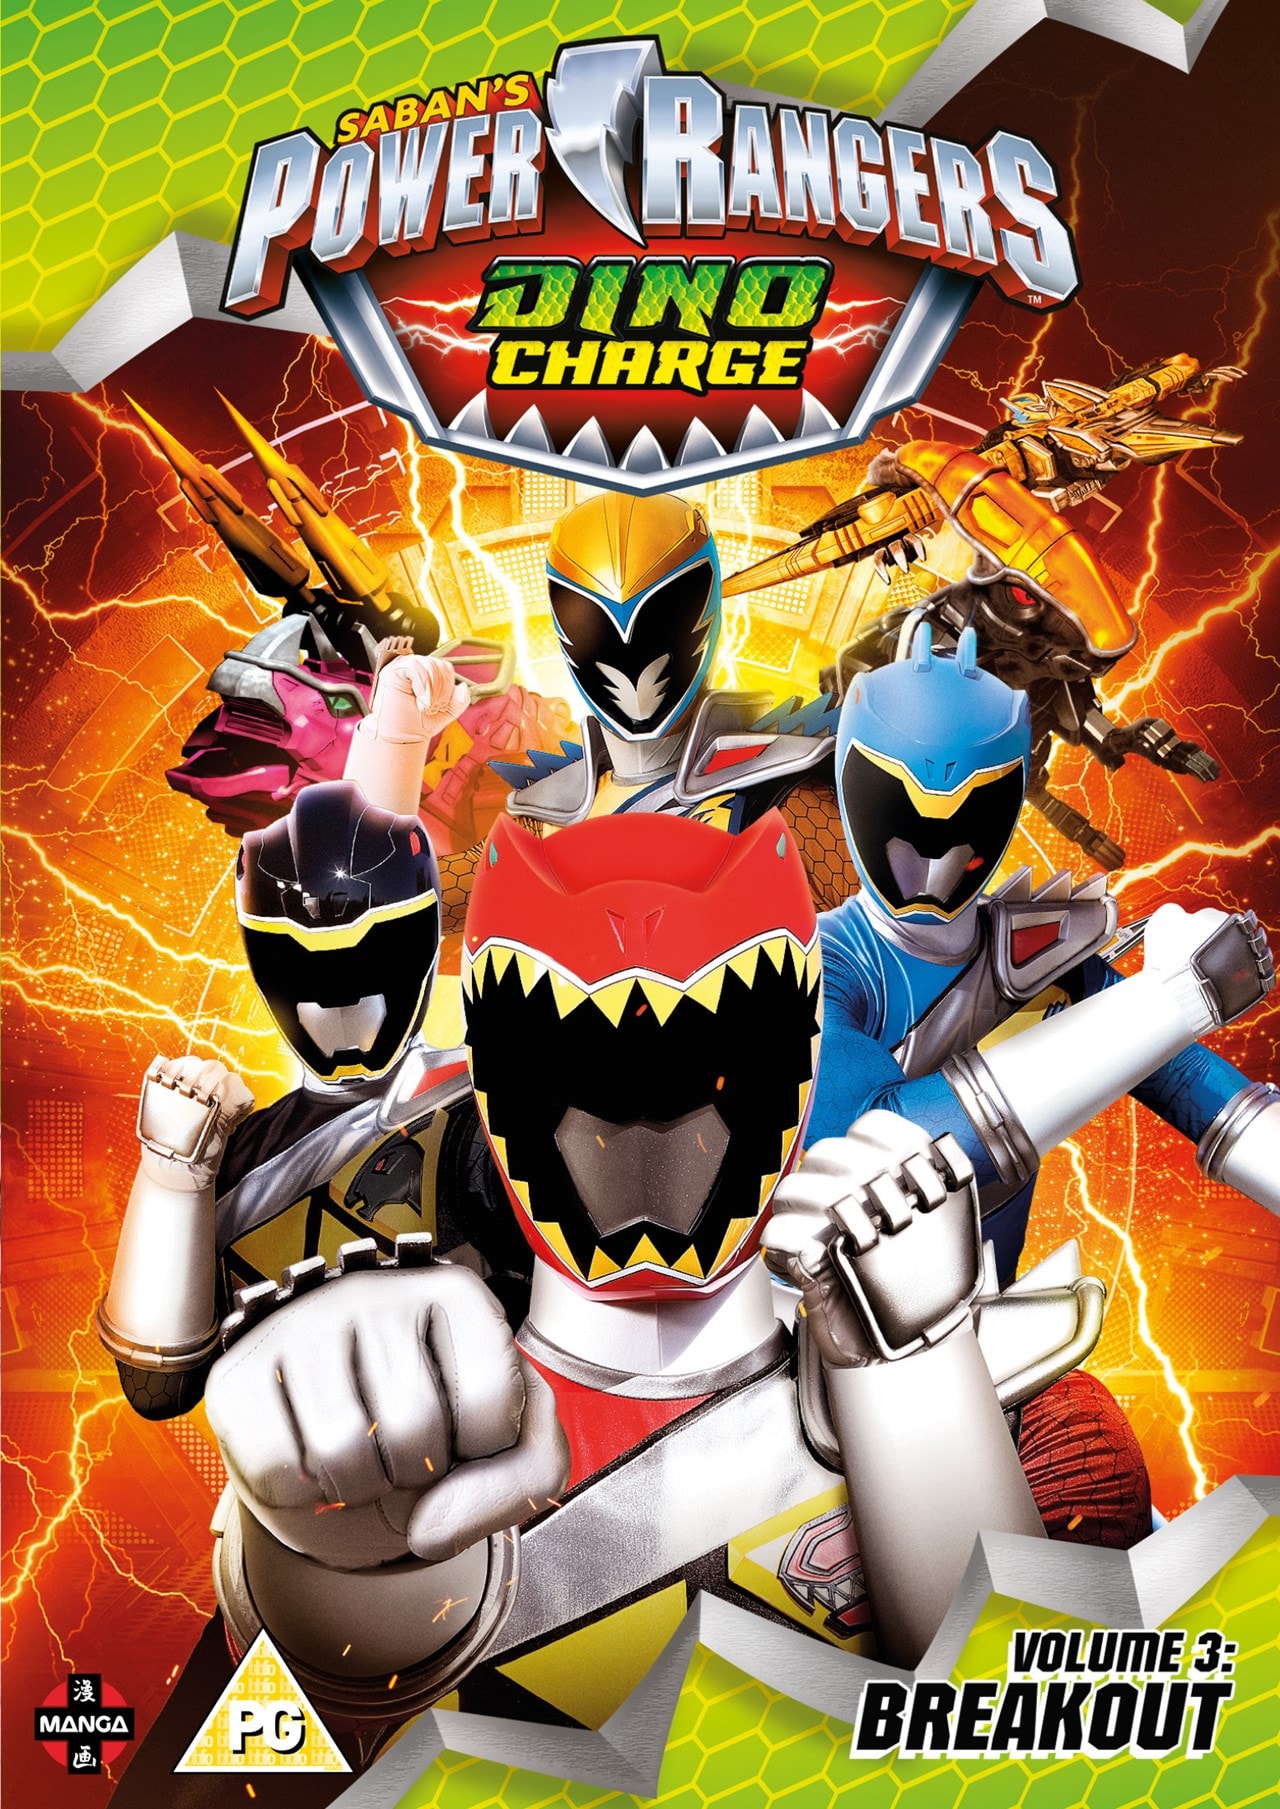 Power Rangers Dino Charge: Volume 3 - Breakout | DVD | Free shipping ...